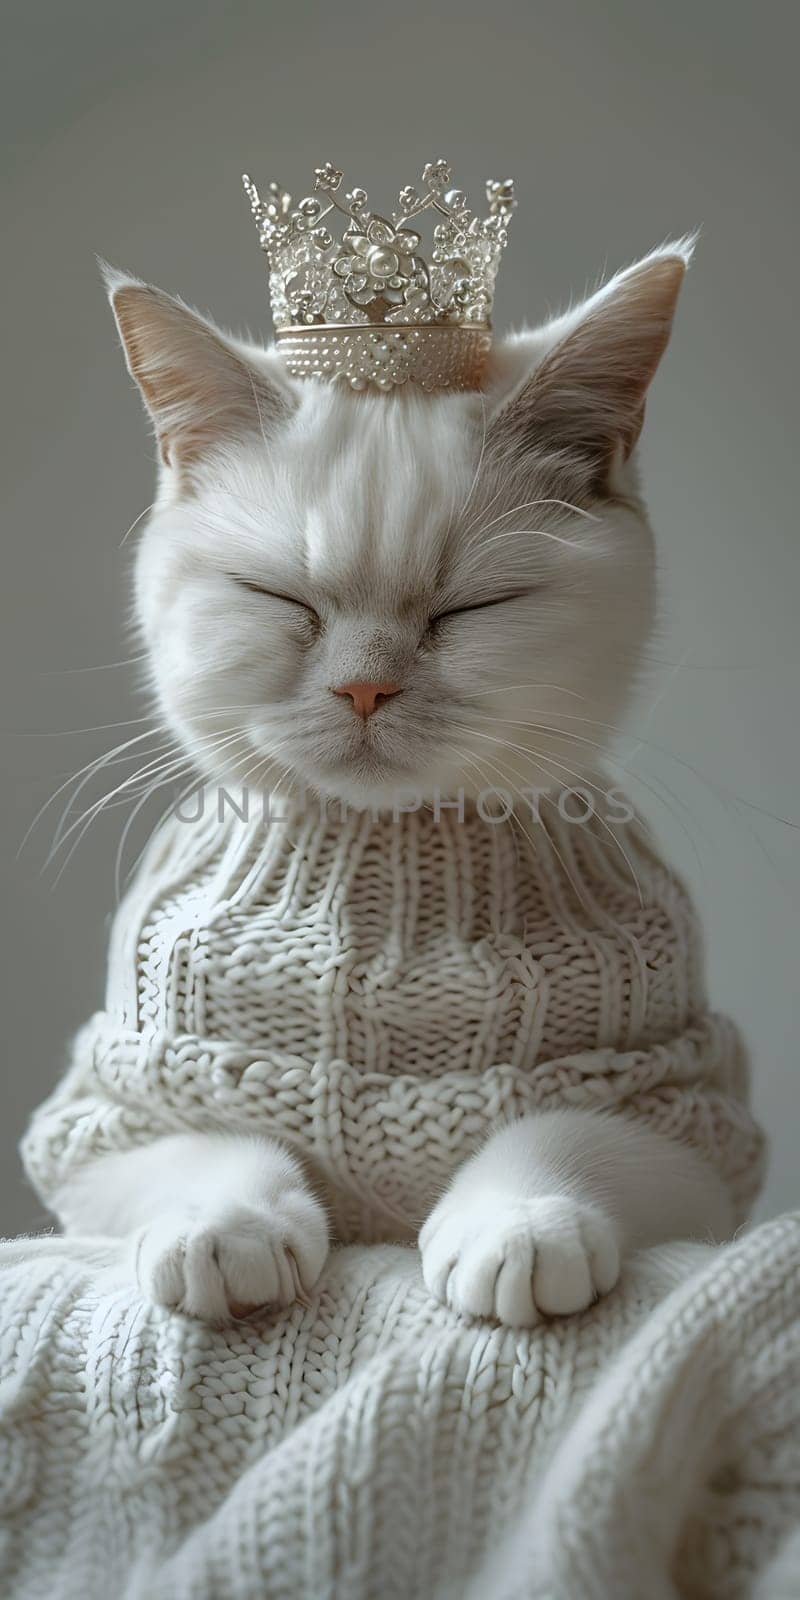 A domestic shorthaired white Felidae cat with whiskers and ears is sitting on a blanket wearing a sweater and a crown, showcasing its carnivorous nature in a cute and royal manner